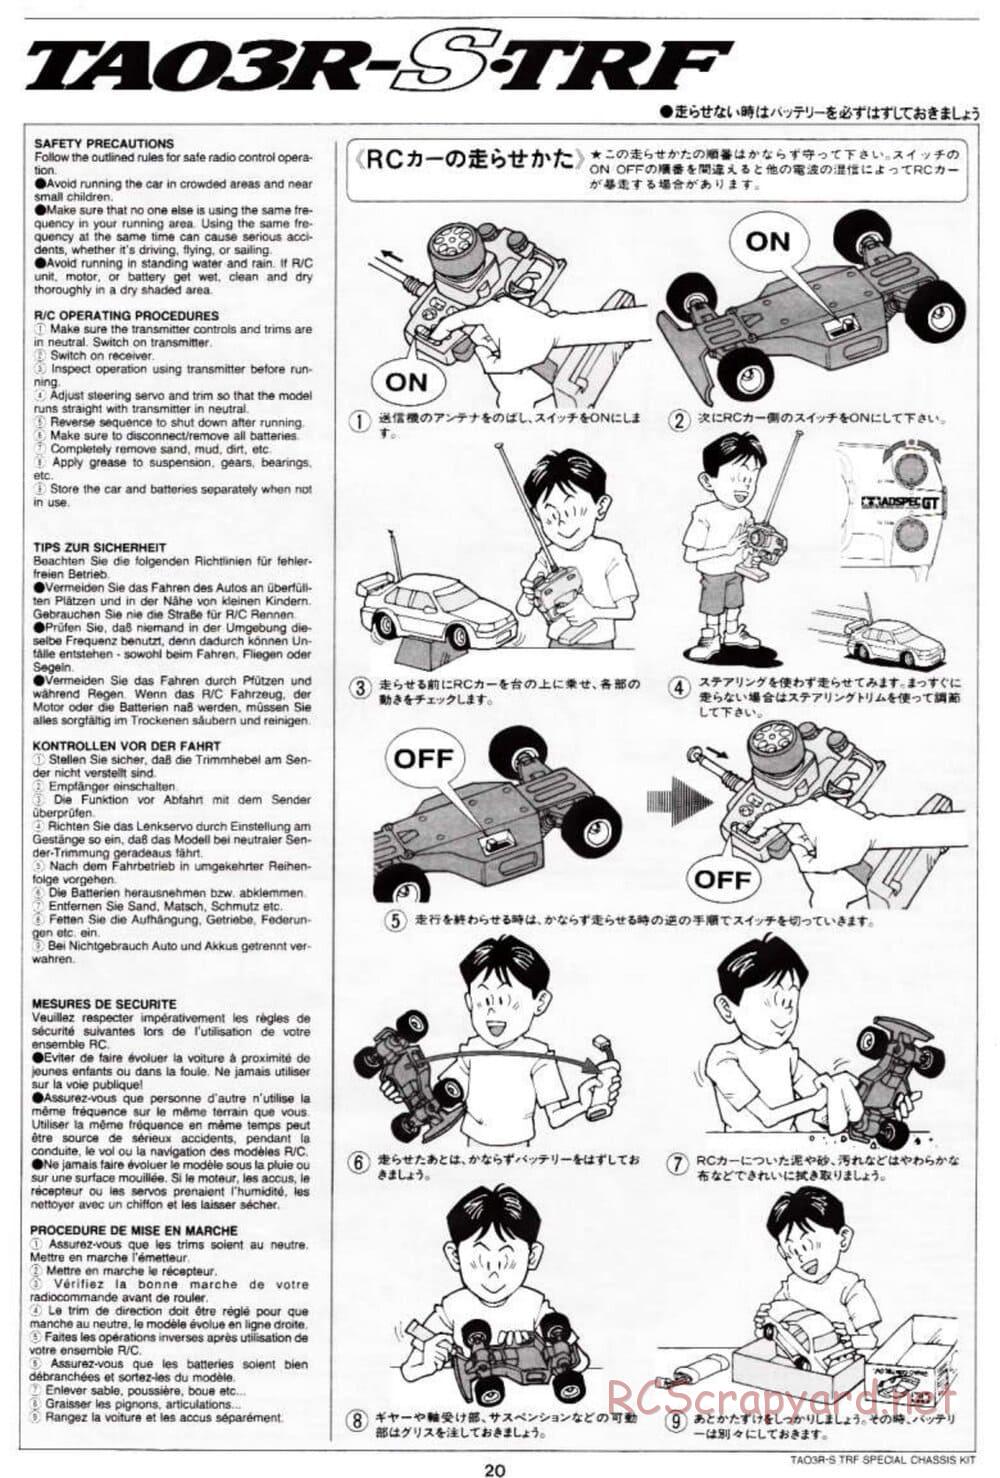 Tamiya - TA-03RS TRF Special Chassis - Manual - Page 20